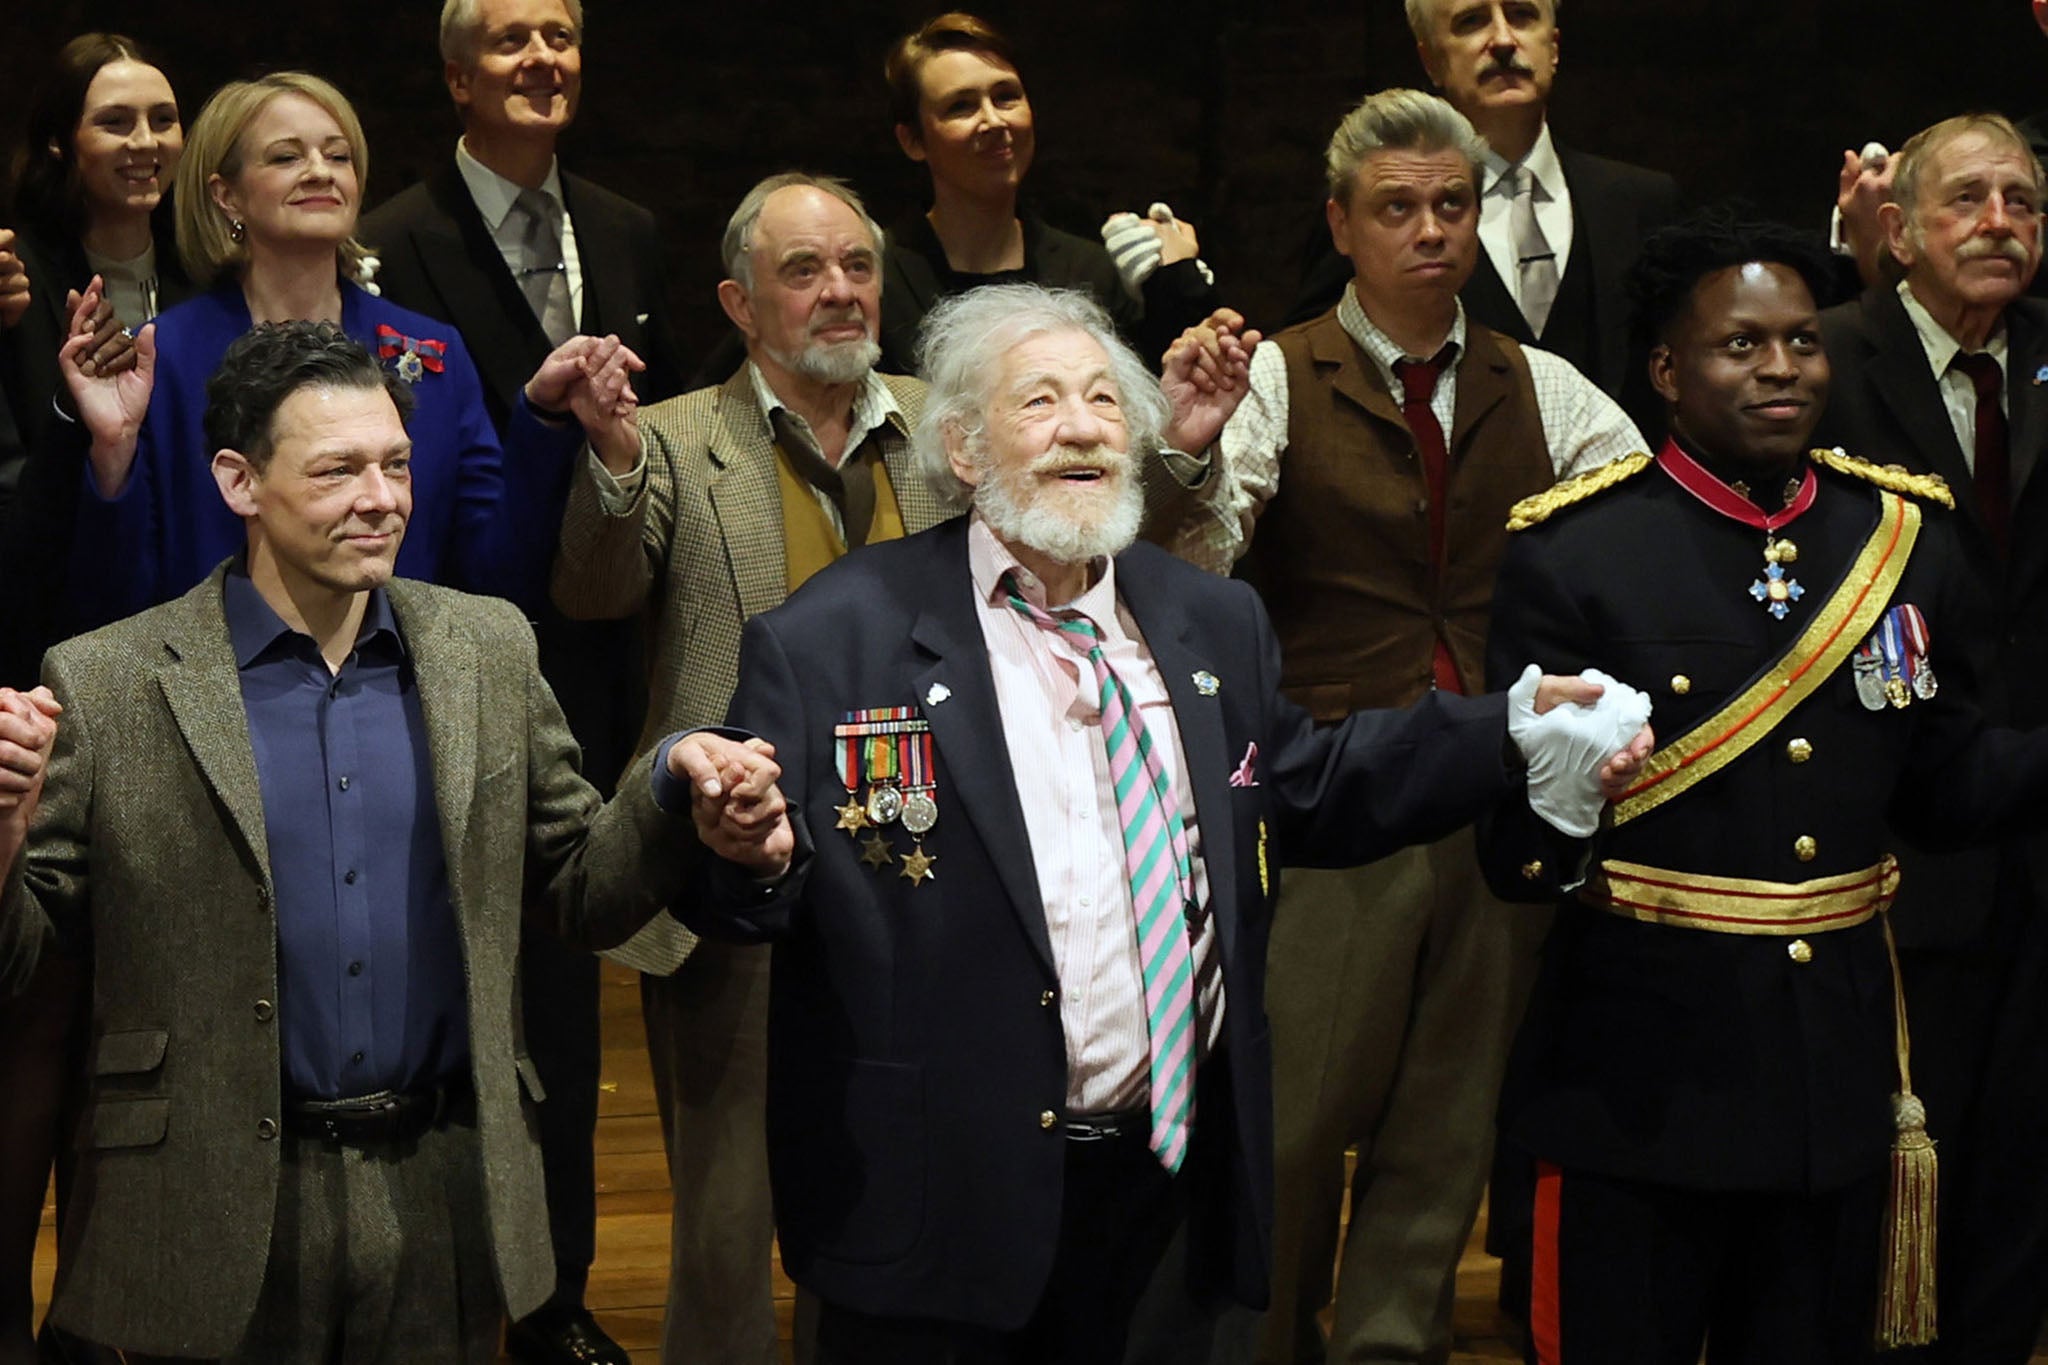 Sir Ian McKellen and castmates at curtain call for the press night performance of ‘Player Kings’ in April